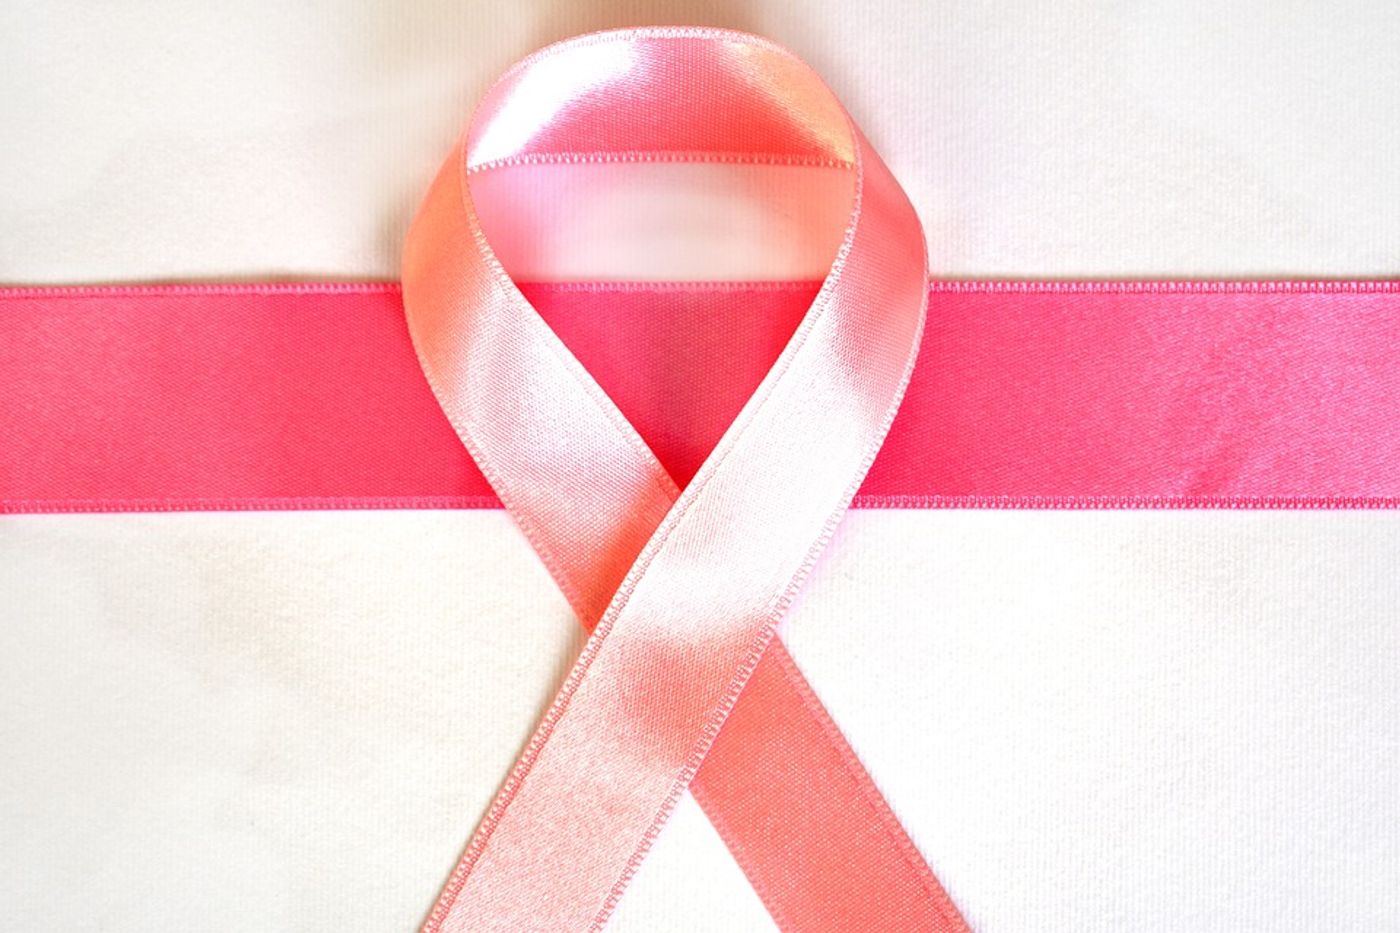 New research suggests a three-scenario method could improve delivering survival rate estimates for women diagnosed with breast cancer. Photo: Pixabay